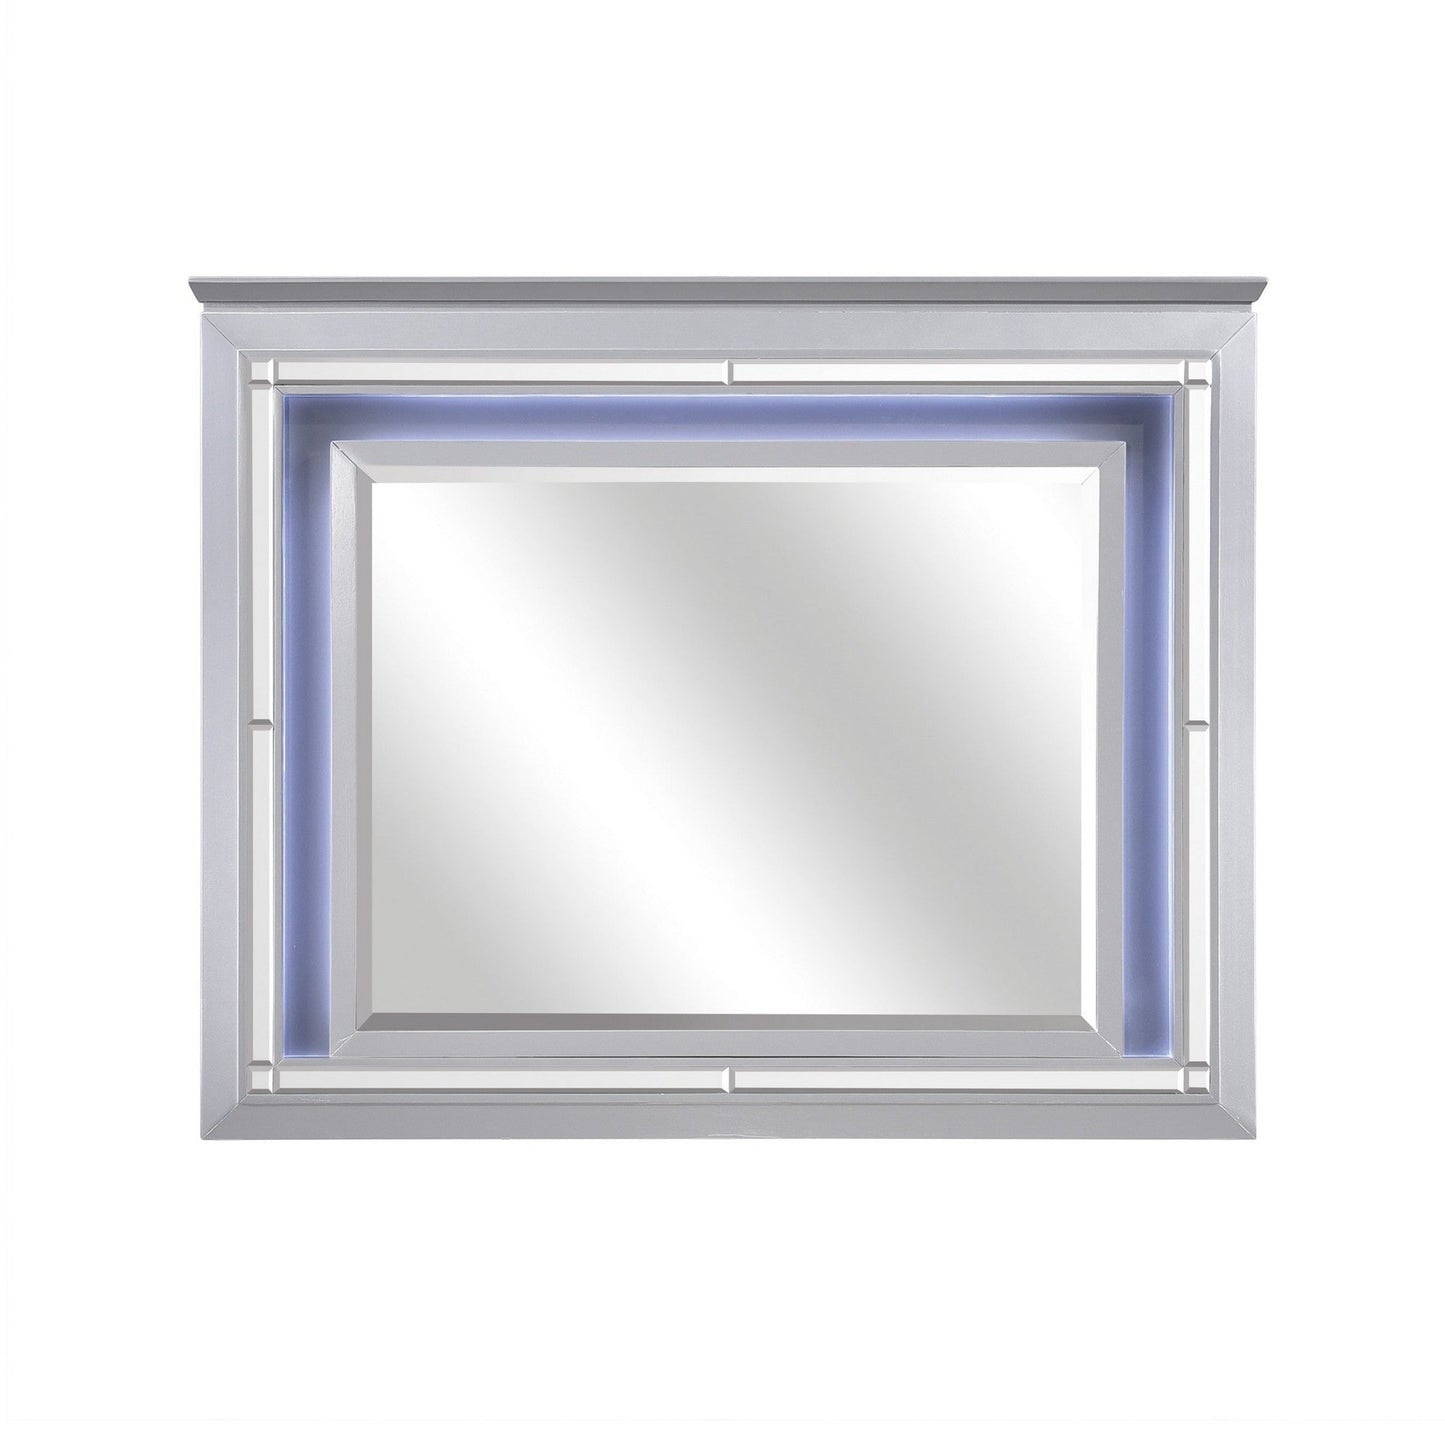 Benzara Silver Contemporary Style Beveled Edge Mirror With LED Light